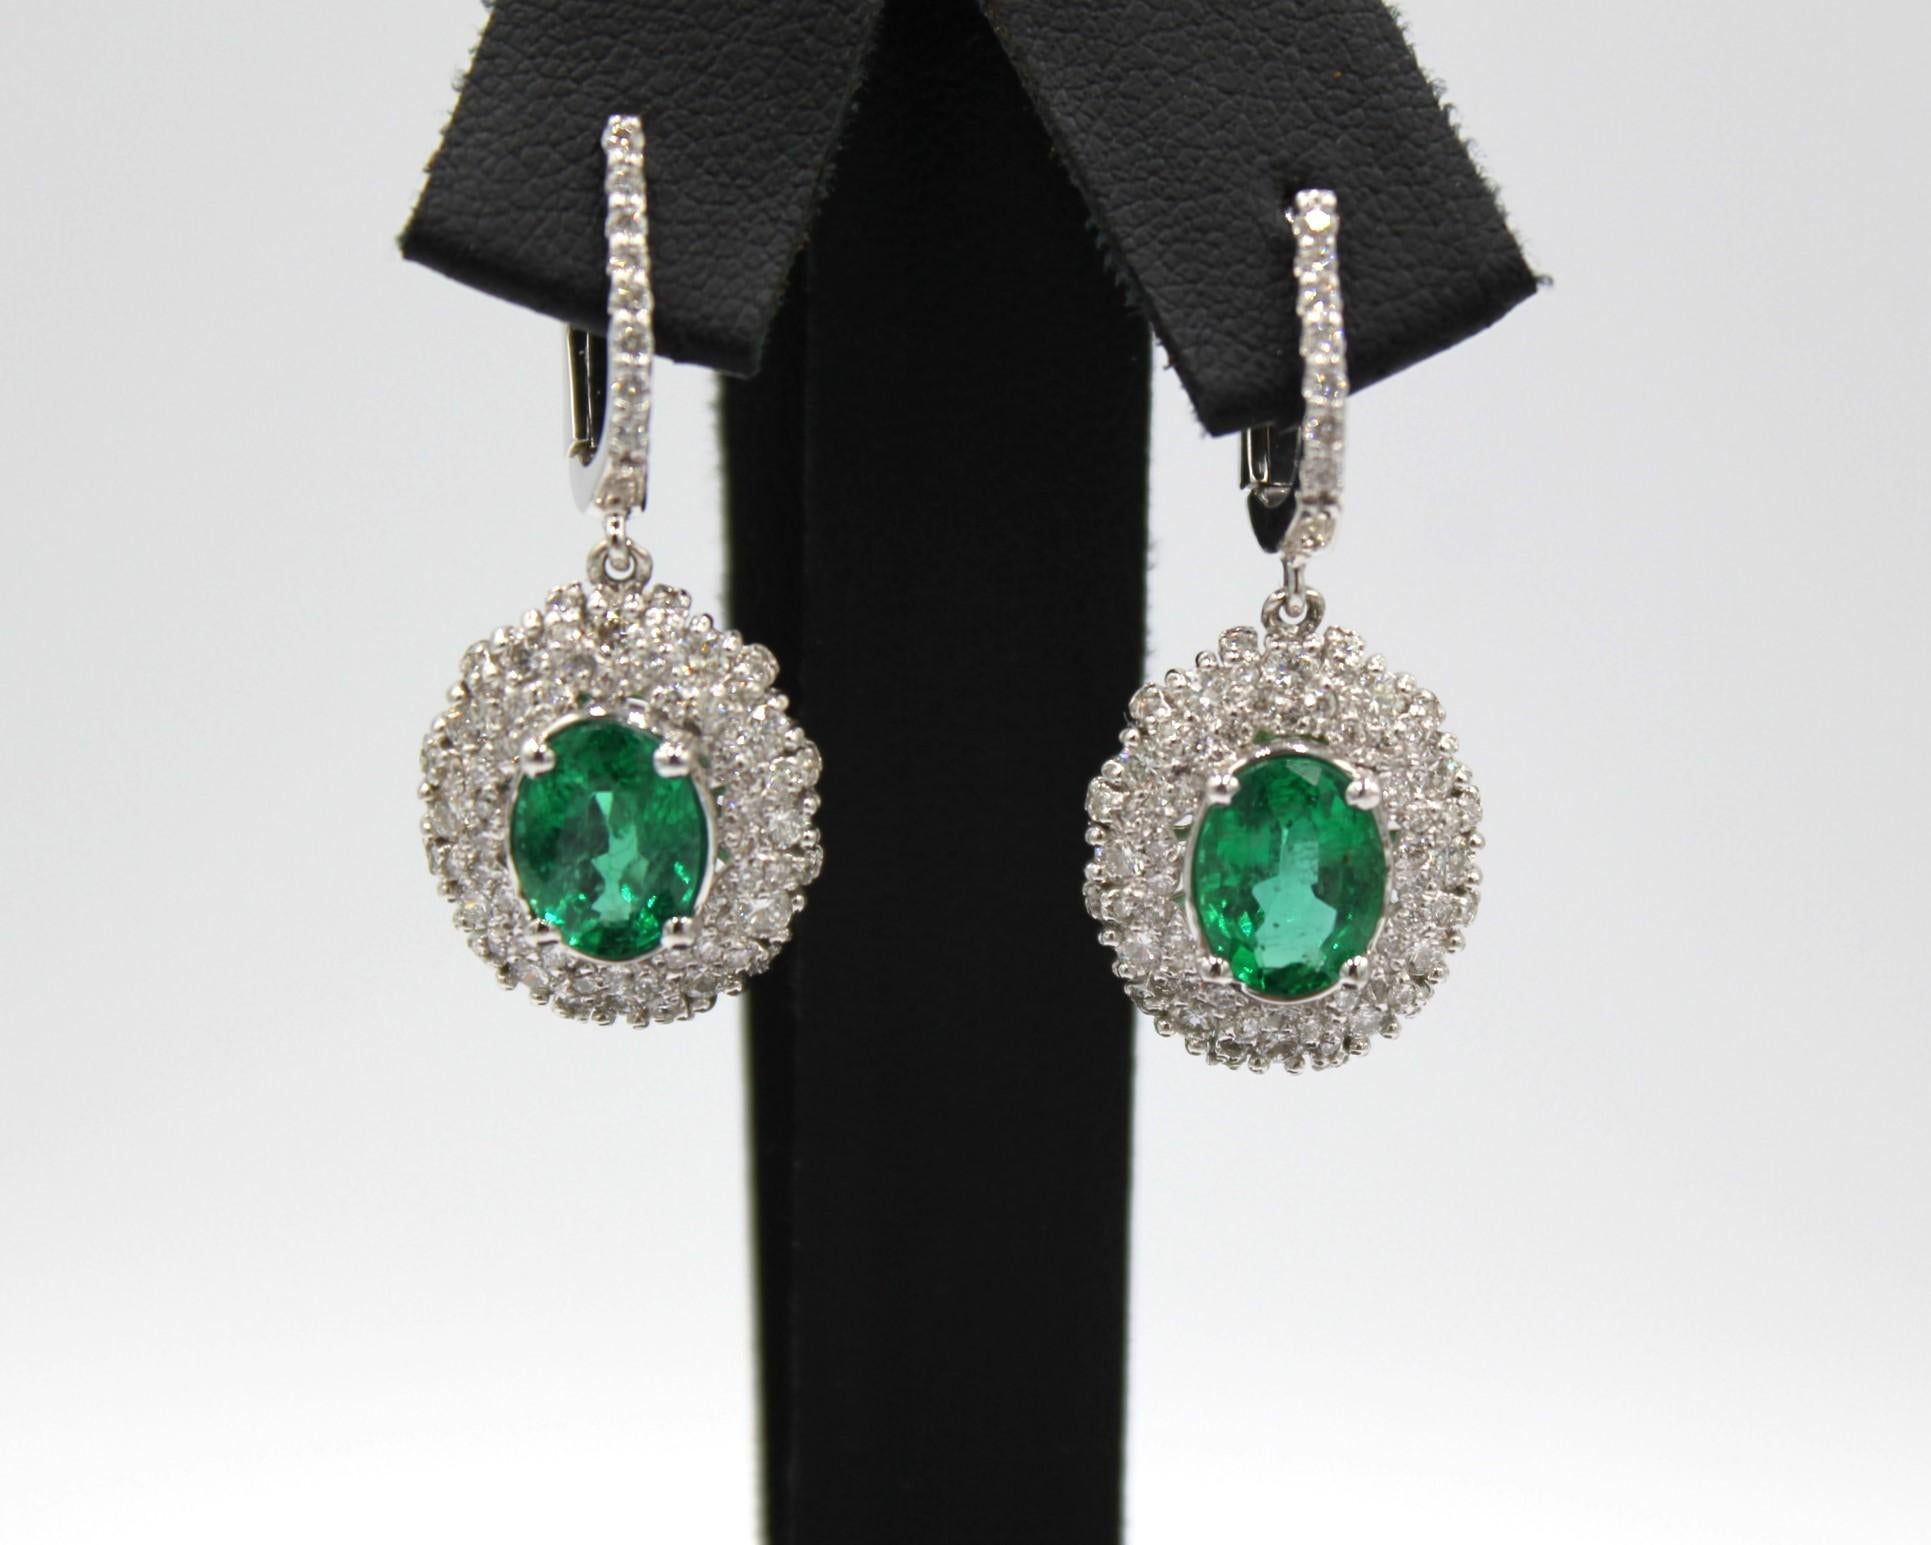 2.54 carats Paired Oval shaped Zambian Emeralds with 134 round Diamonds, totaling the weight of 1.54 carats. 

This gorgeous Emerald Diamond Earring will highlight your elegance and uniqueness. 

Item Details:
- Type: Earring
- Metal: 18K Gold
-